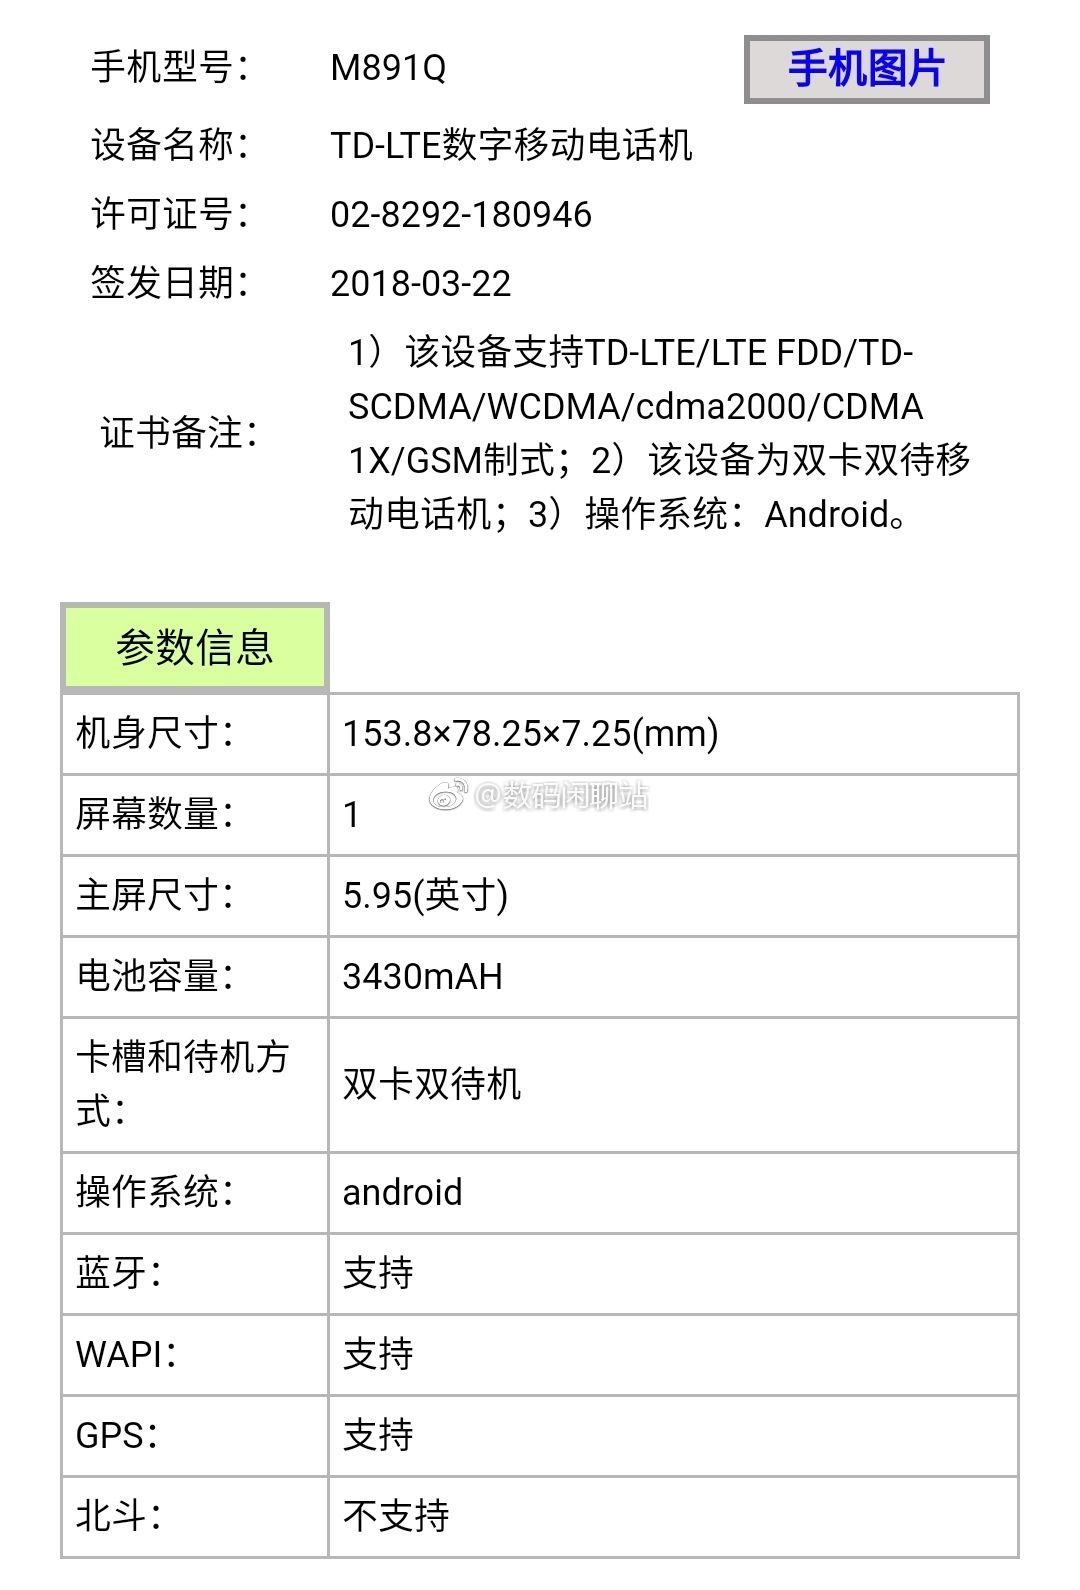 meizu m871 m881 and m891 spechs leak from ministry of industry and information technology